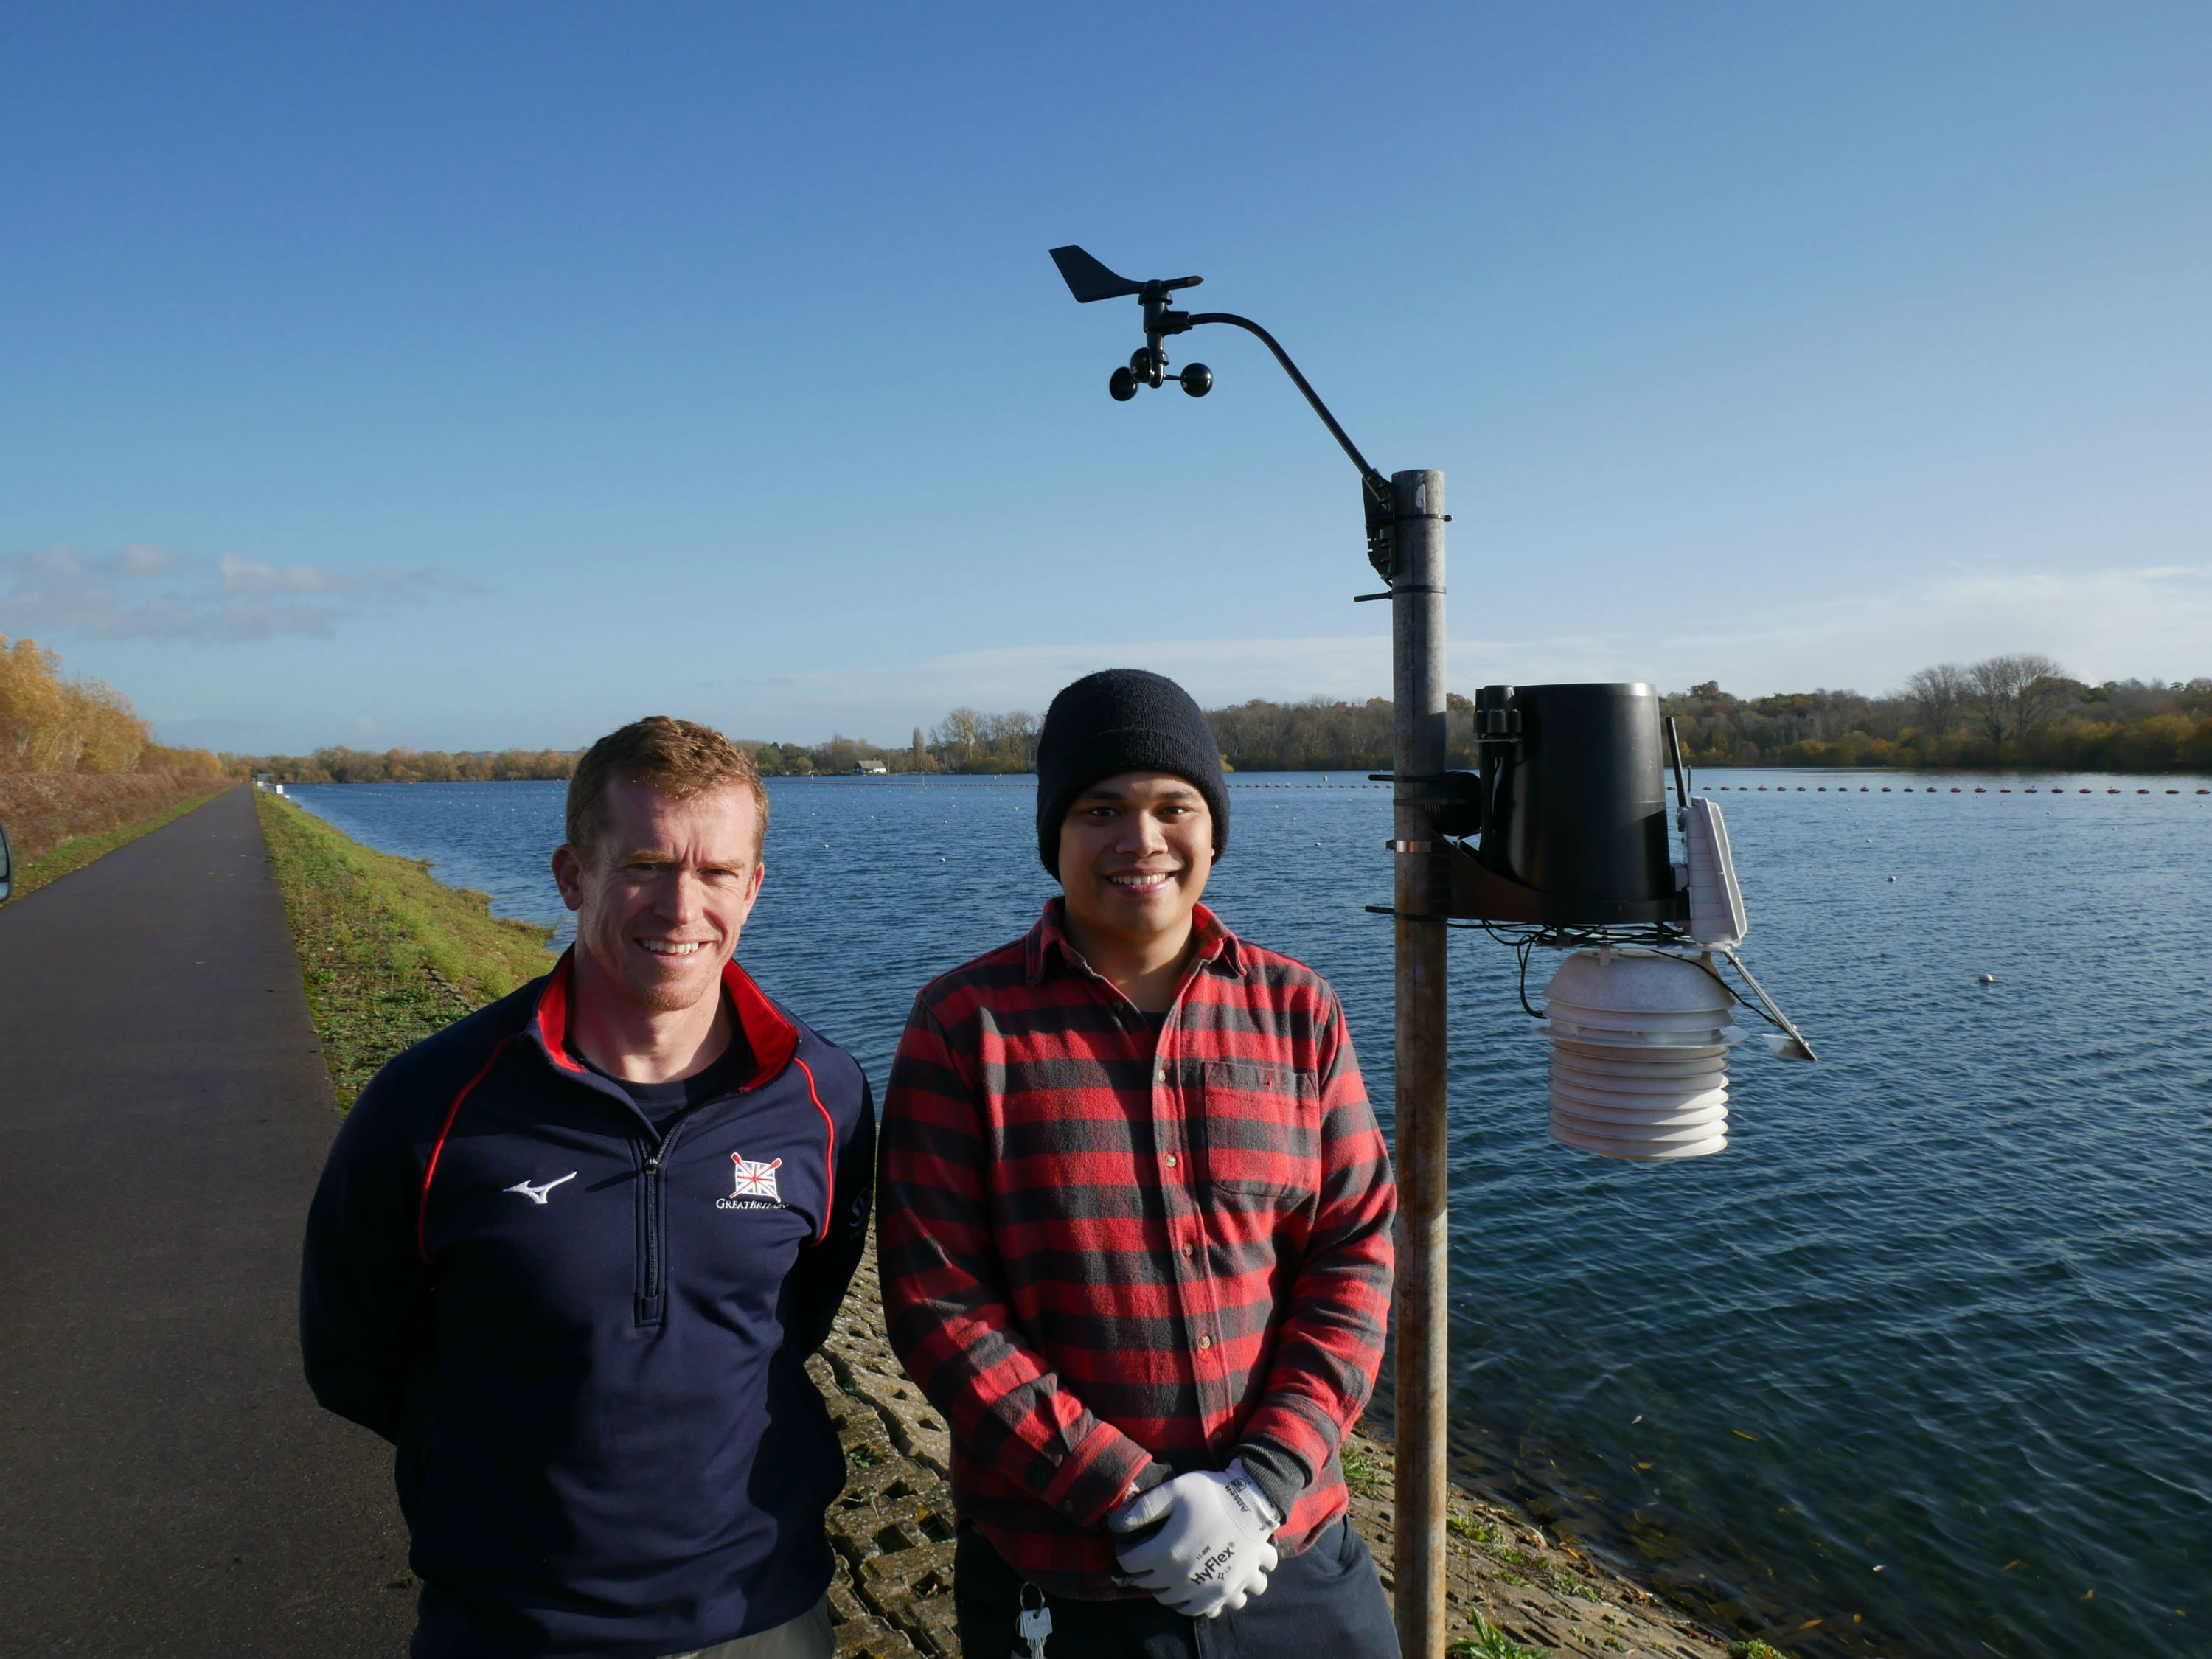 Cahyo Leksmono, IT technician at the University of Reading, and Mark Homer, Head of High Performance Science and Medicine at British Rowing, next to the newly installed weather station